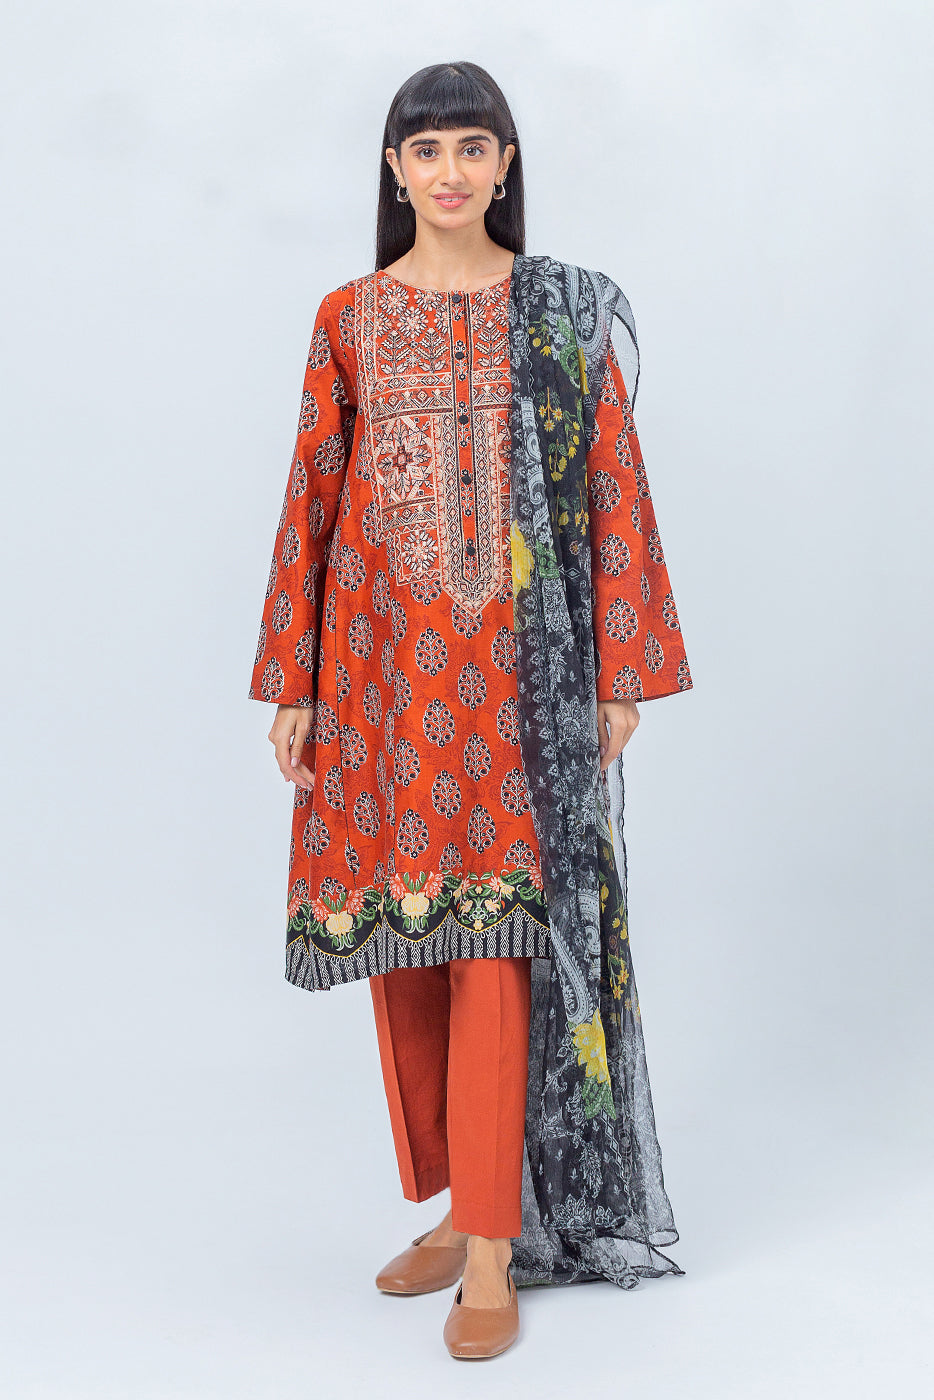 3 PIECE - EMBROIDERED CAMBRIC SUIT - NOMADIC IMPRESSION (UNSTITCHED) - BEECHTREE